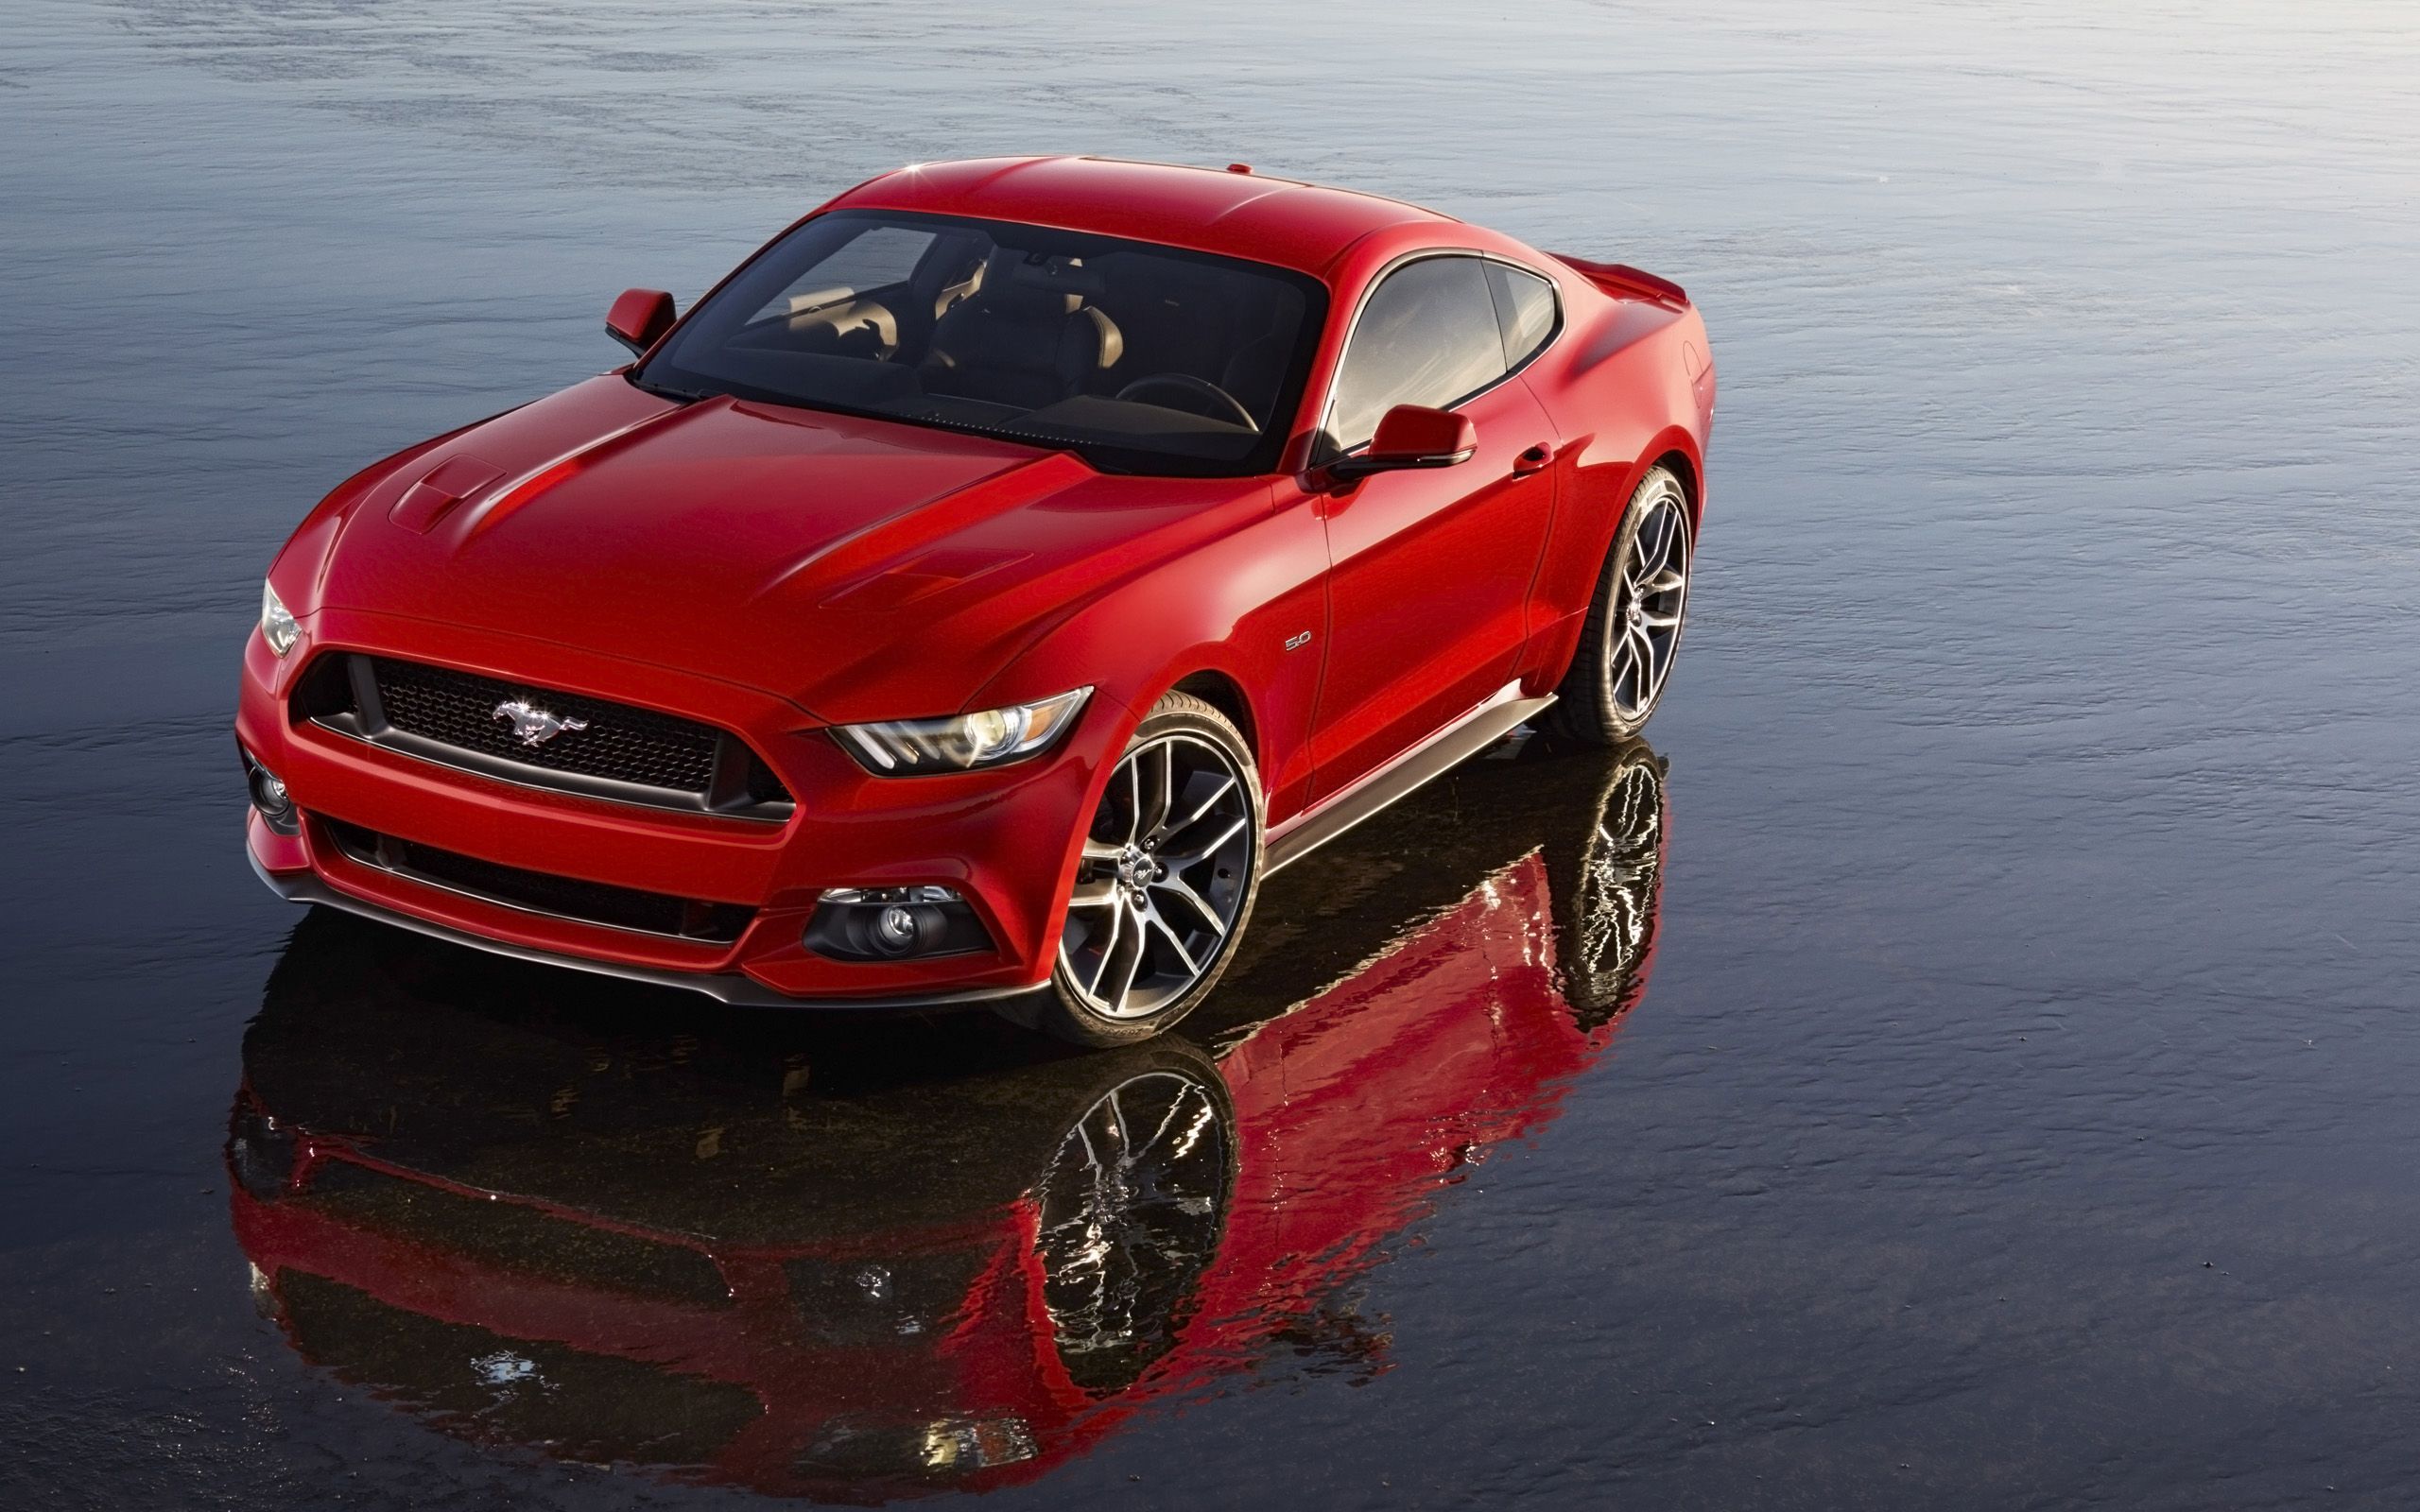 2015 Ford Mustang Wallpaper HD Car Backgrounds